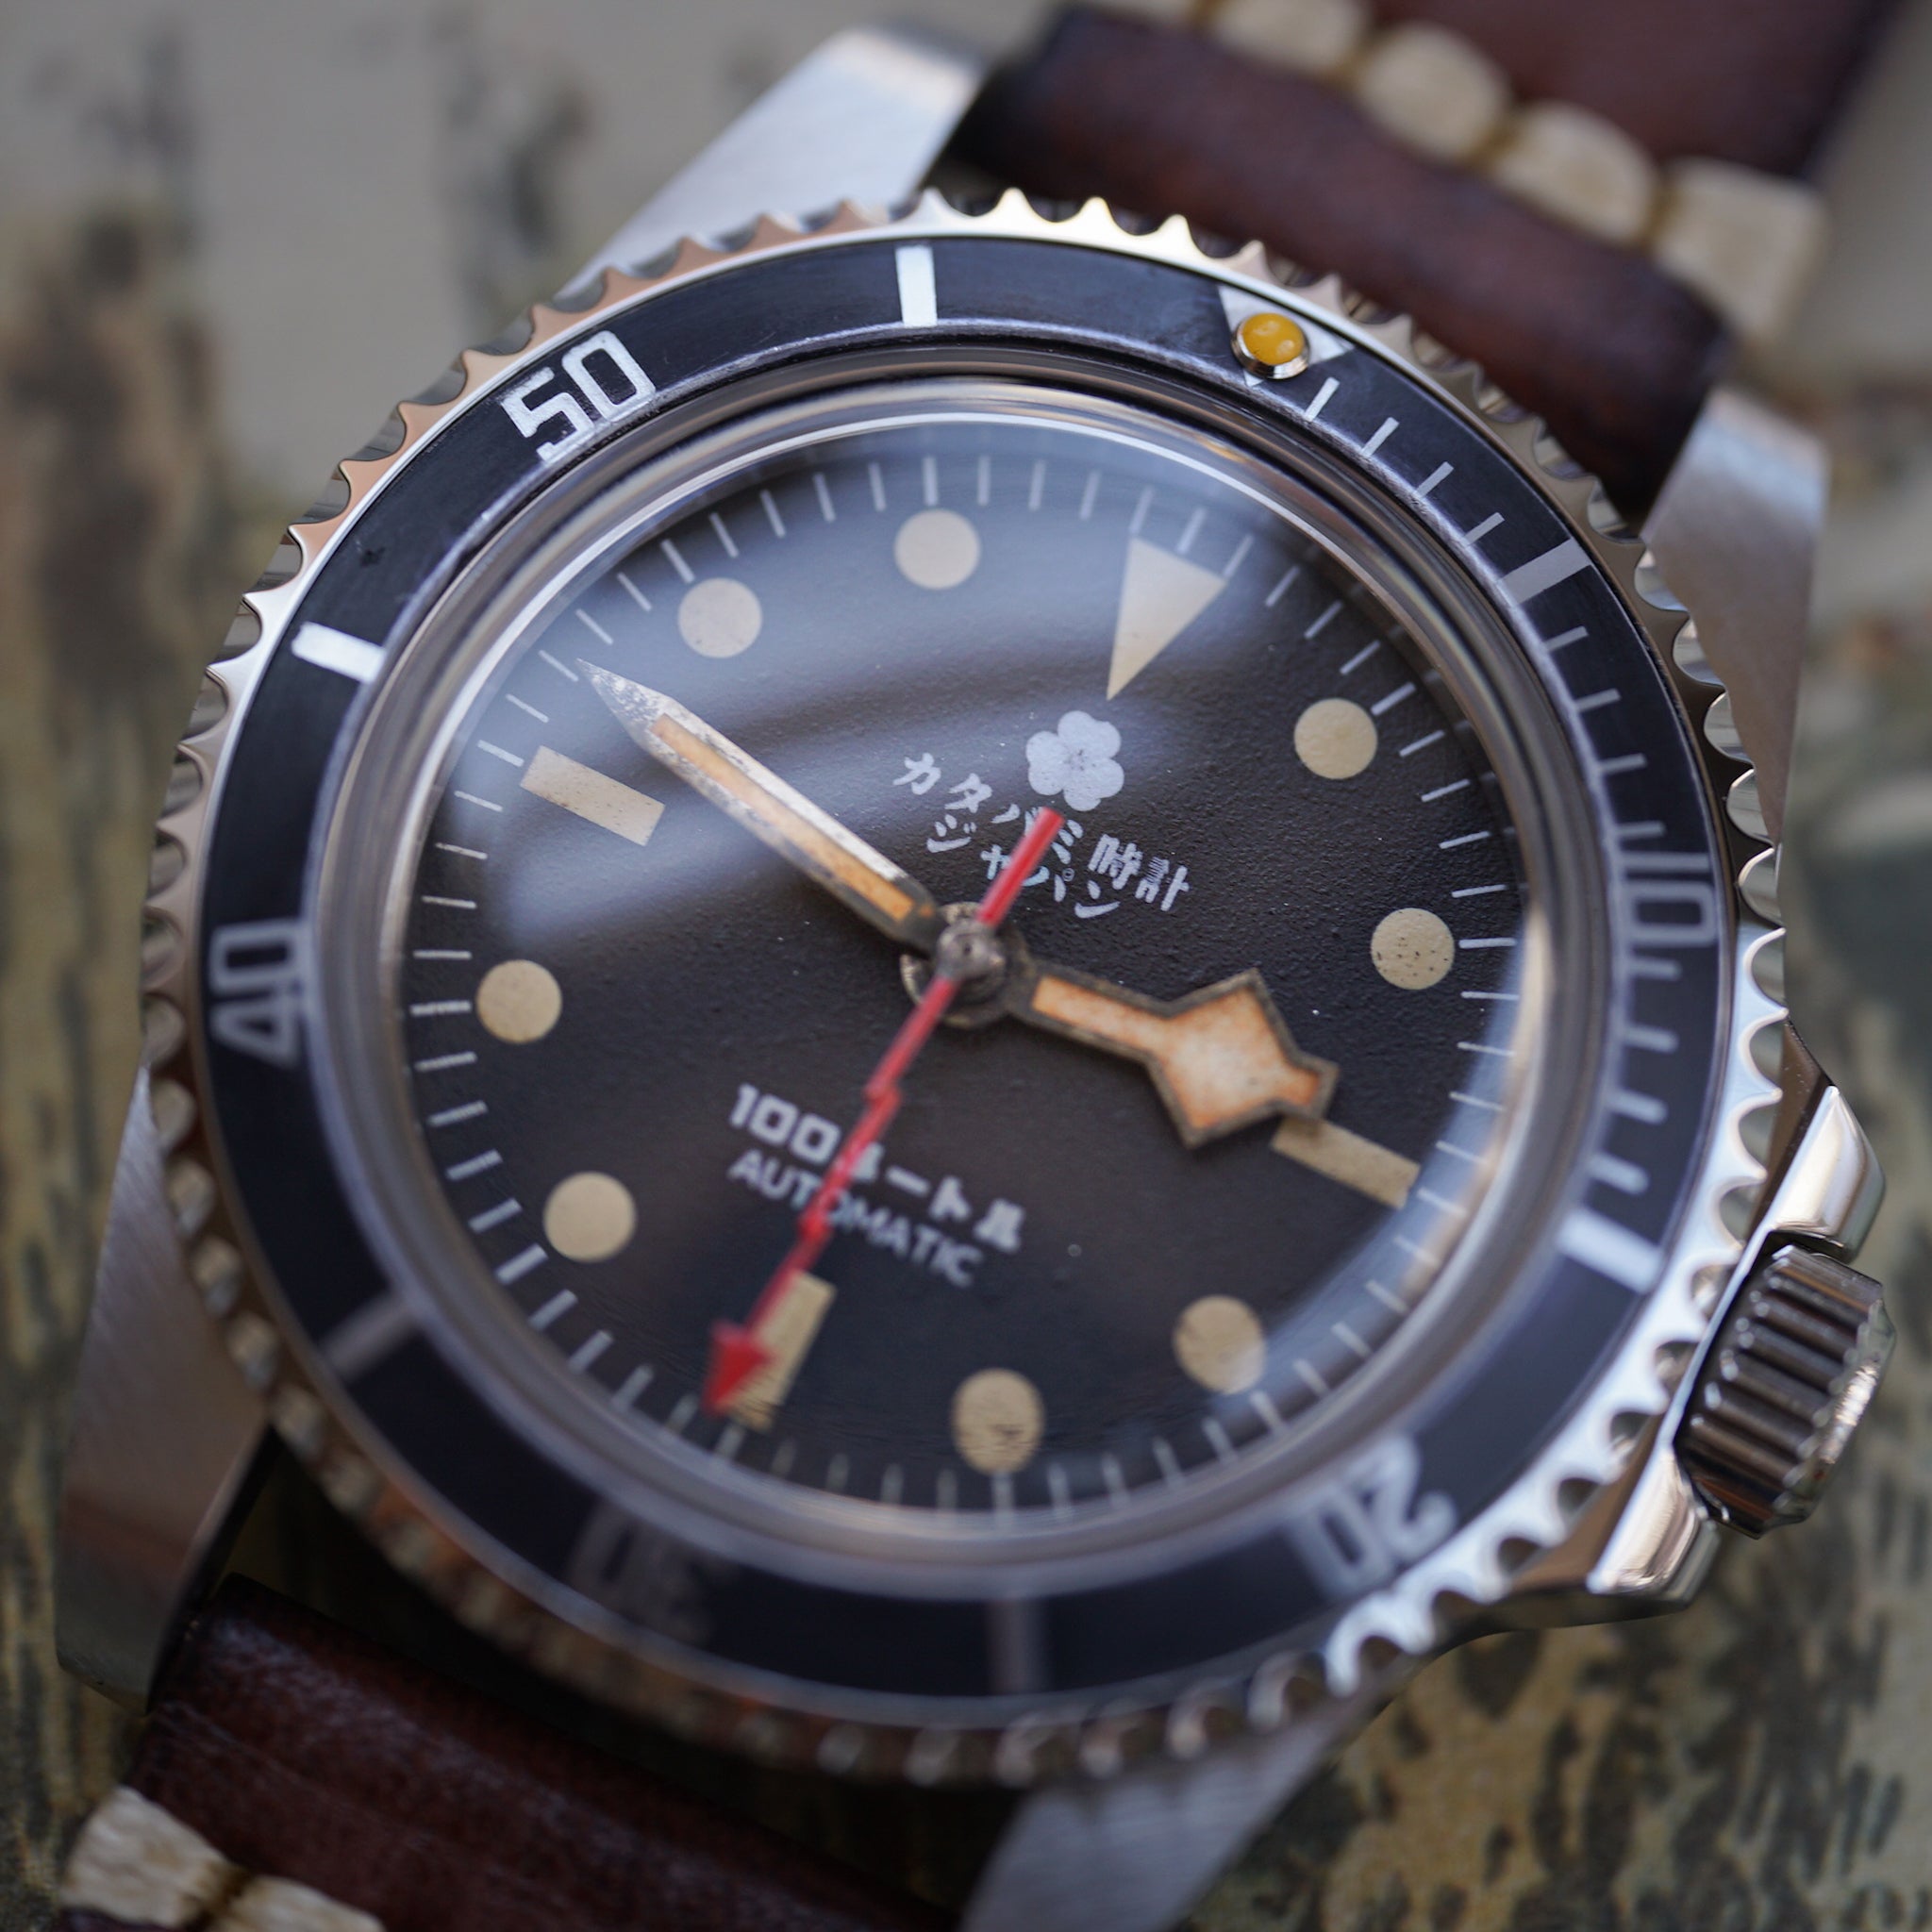 The diver "233"